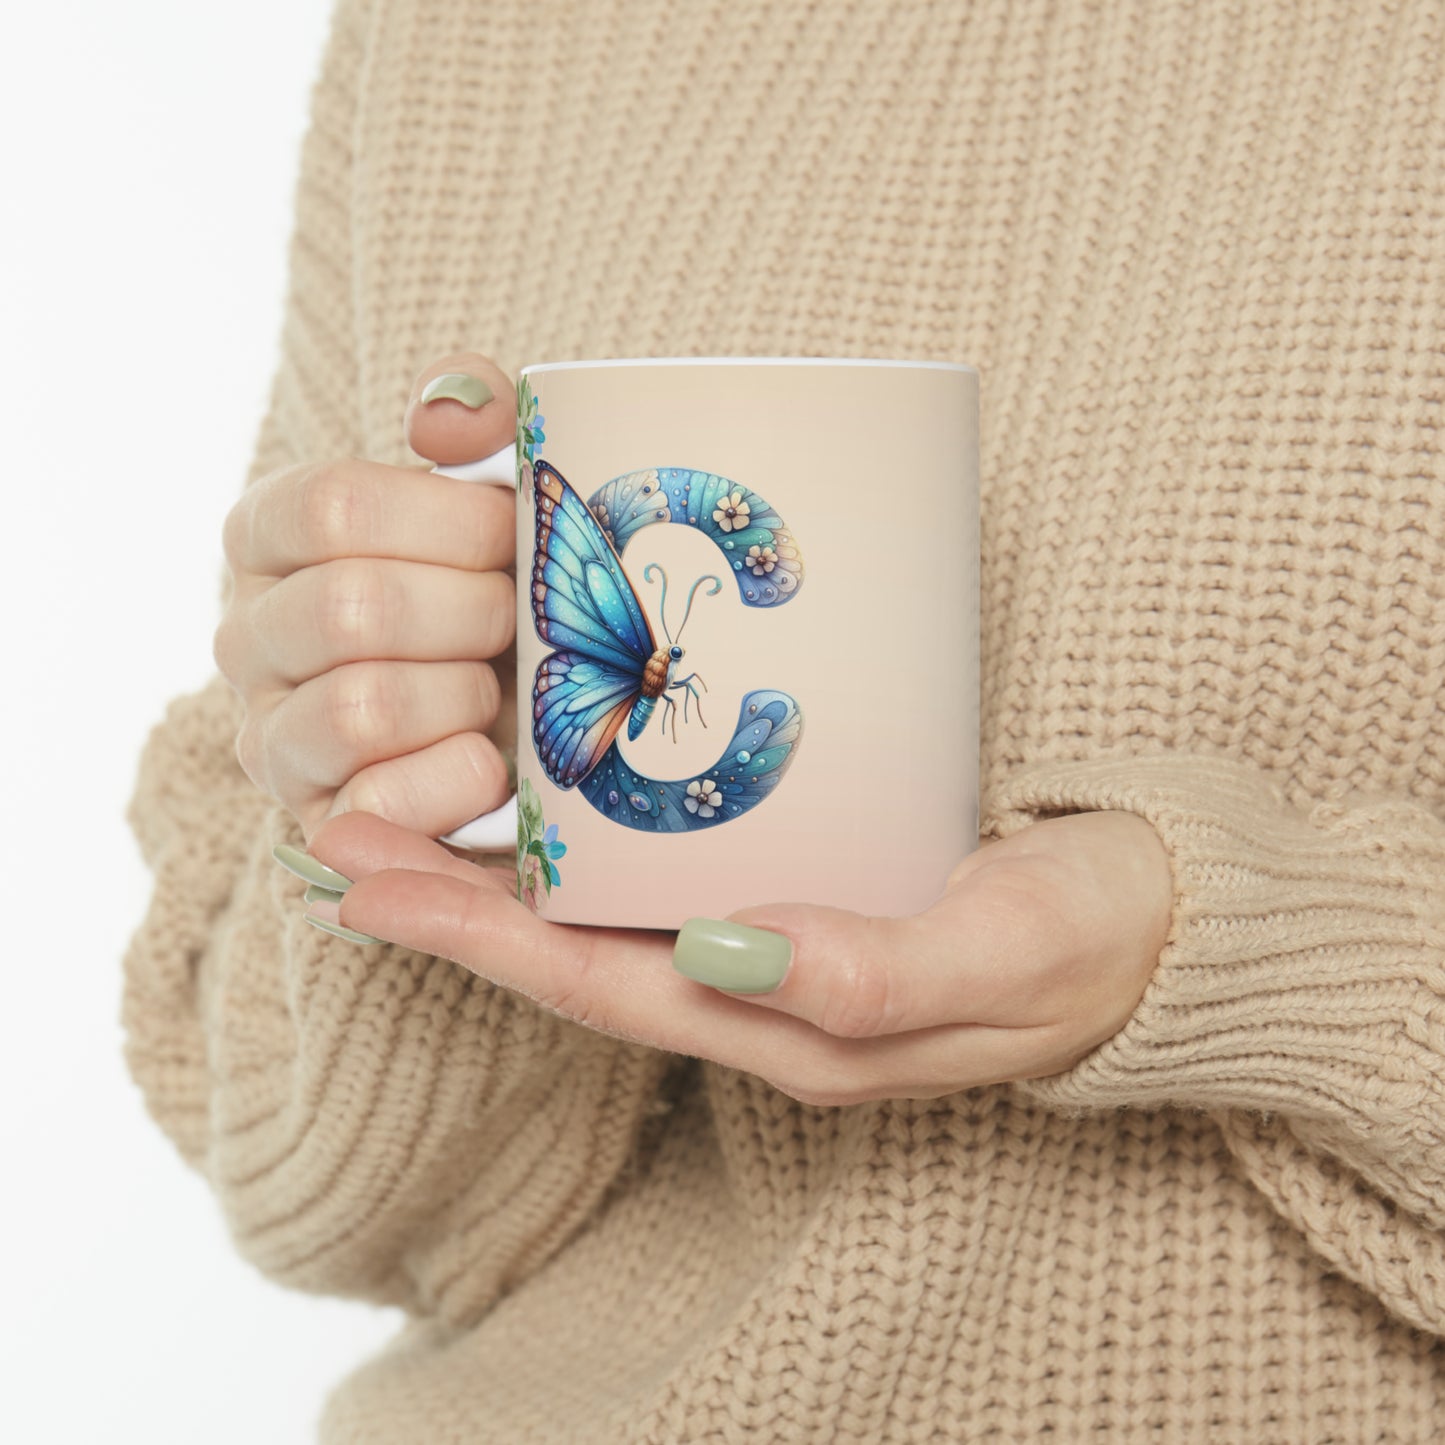 Captivating Charm: Cheerful Butterfly Letter C - Spring Mug